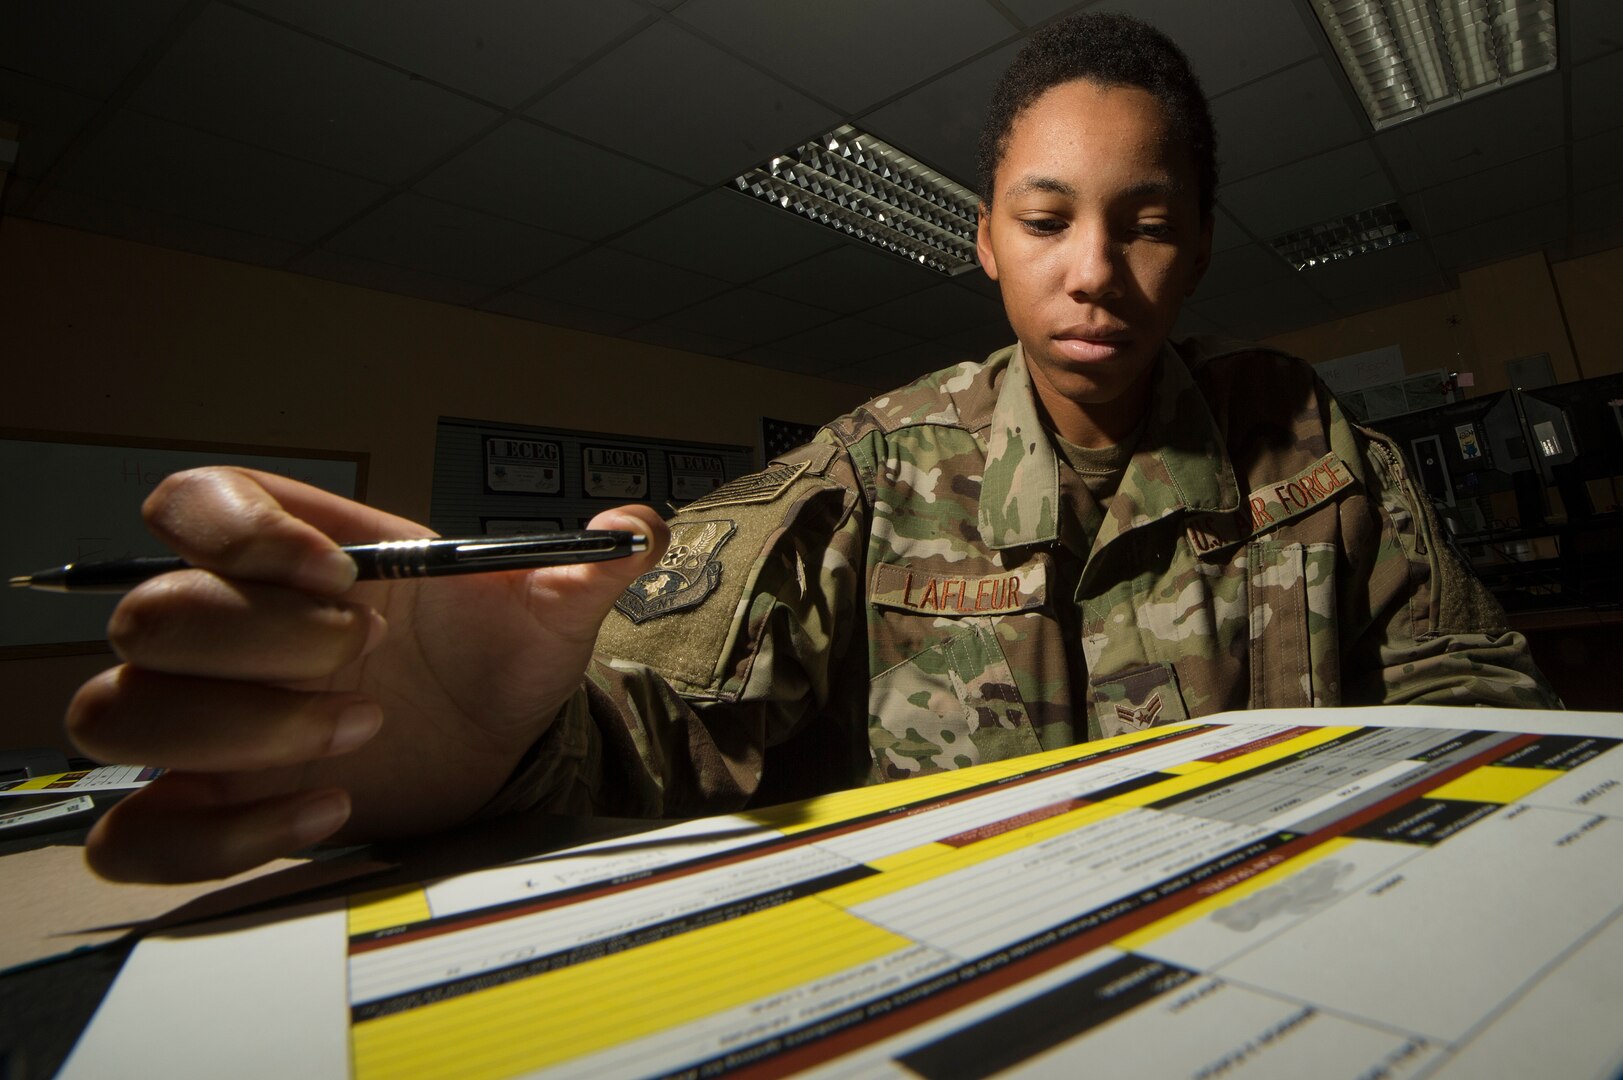 U.S. Air Force Airman 1st Class Evanah Lafleur, 557th Expeditionary RED HORSE Squadron logistics planner, verifies inbound passenger information at Al Udeid Air Base, Qatar, April 3, 2019. Lafleur is responsible for coordinating the movement of civil engineers and cargo to construction sites at deployed locations across U.S. Central Command (CENTCOM). Logistics Airmen were vital in the completion of more than 400 construction missions across the CENTCOM theater during a six-month period. (U.S. Air Force photo by Tech. Sgt. Christopher Hubenthal)